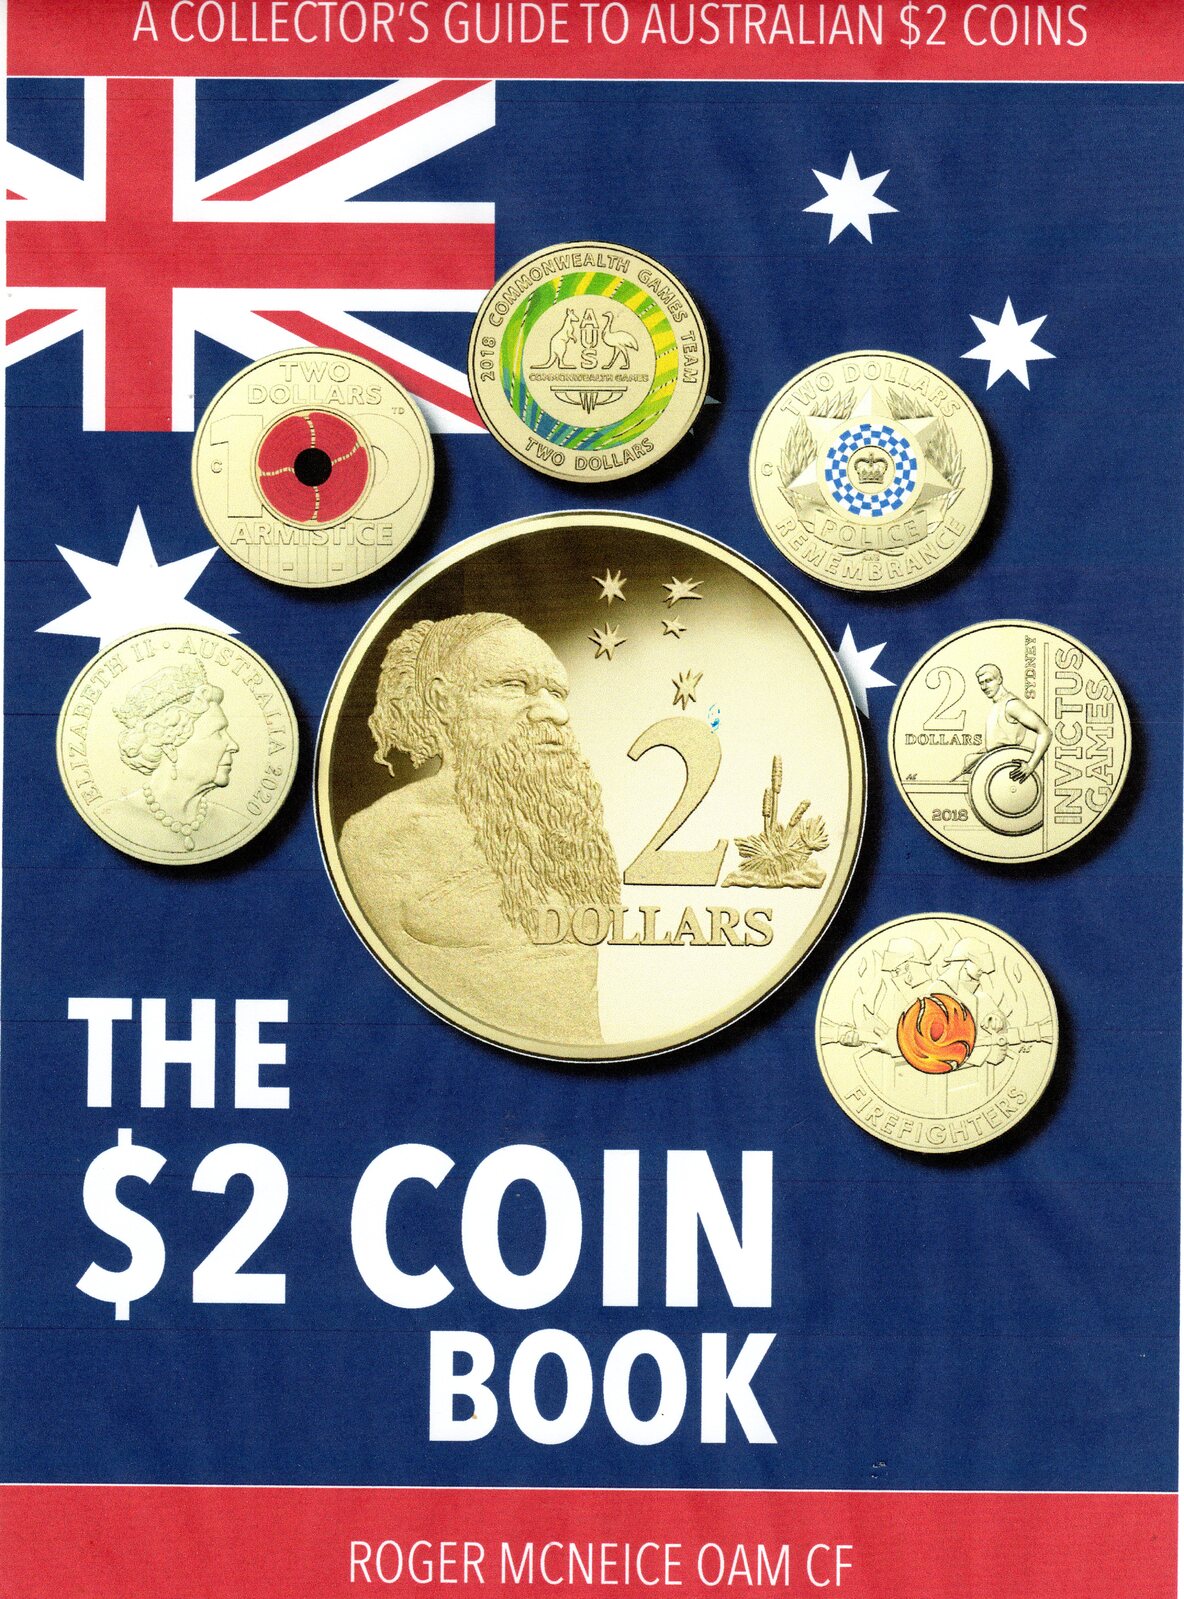 Download The $2 Coin Book A Collectors Guide To Australian Two Dollar Coins - Aussie Coins and Notes